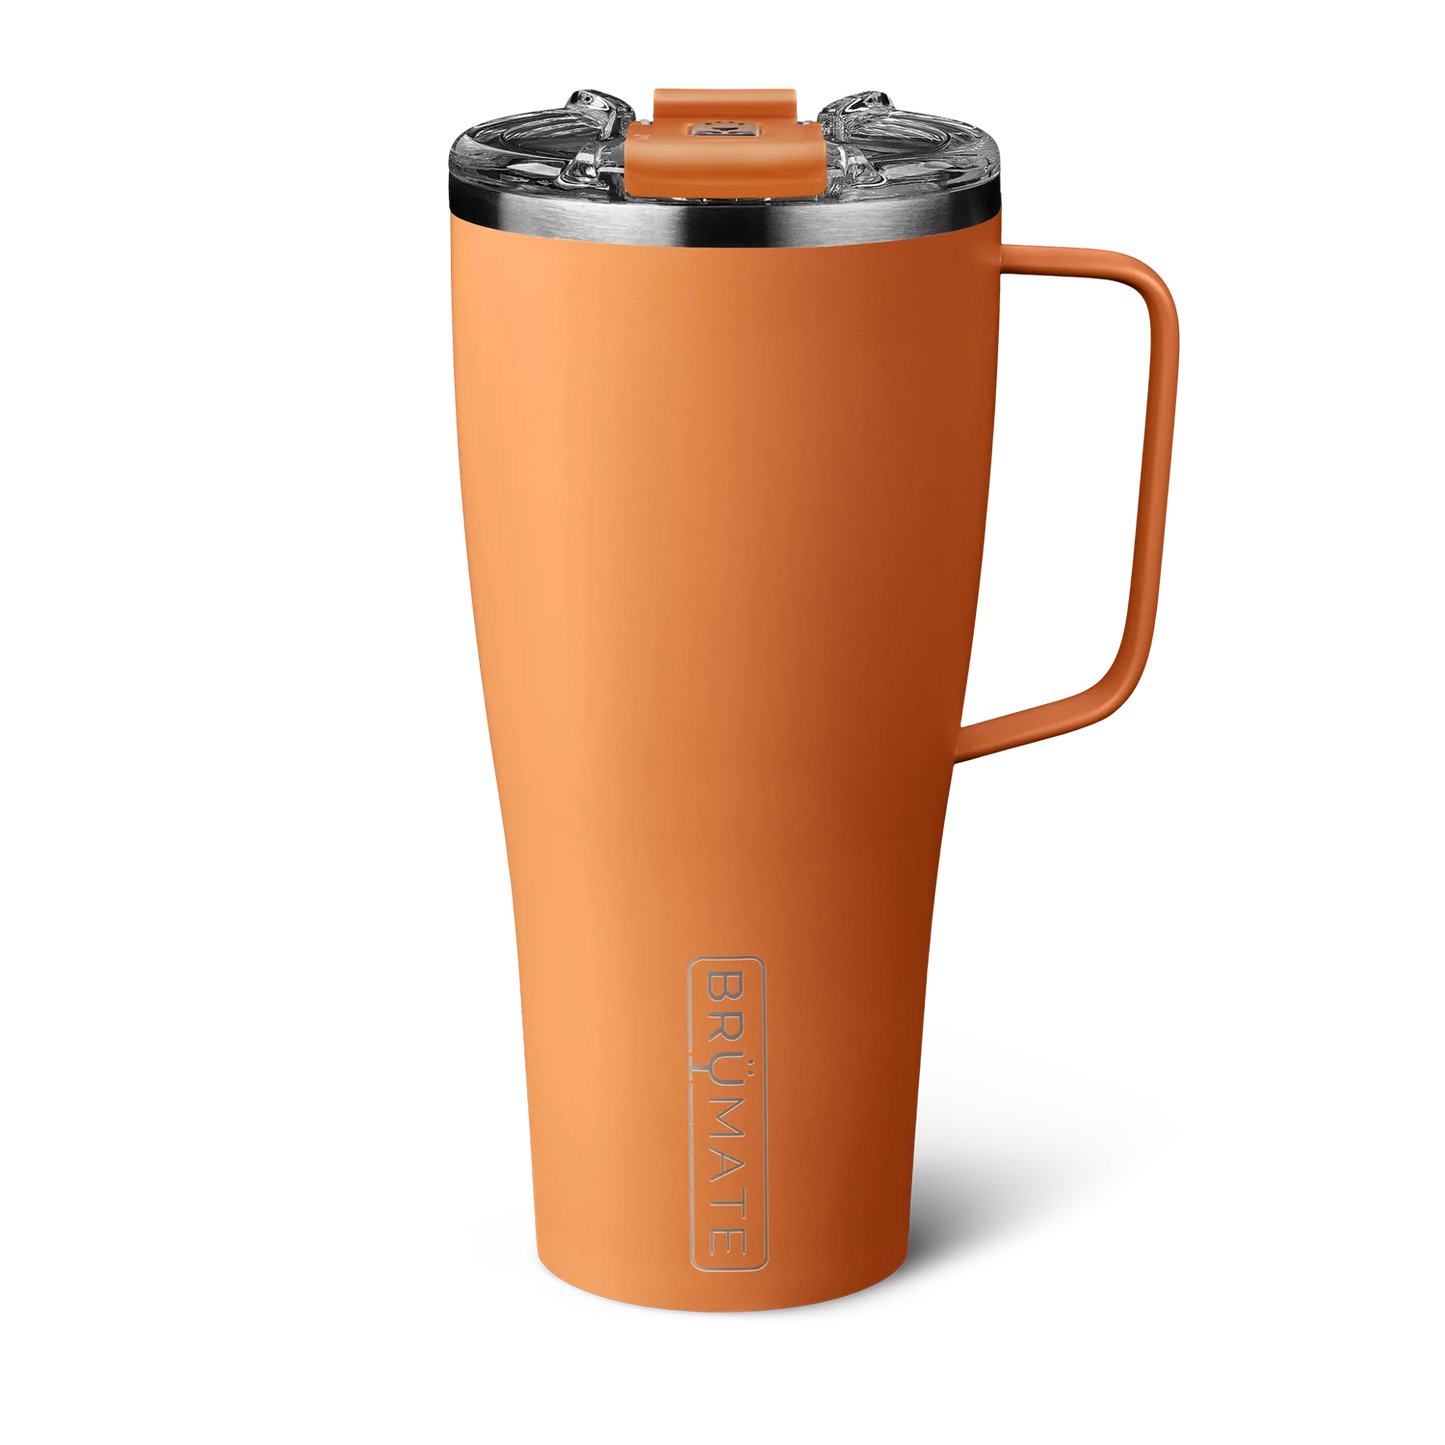 Brumate Toddy XL Drinkware in Matte Clay at Wrapsody